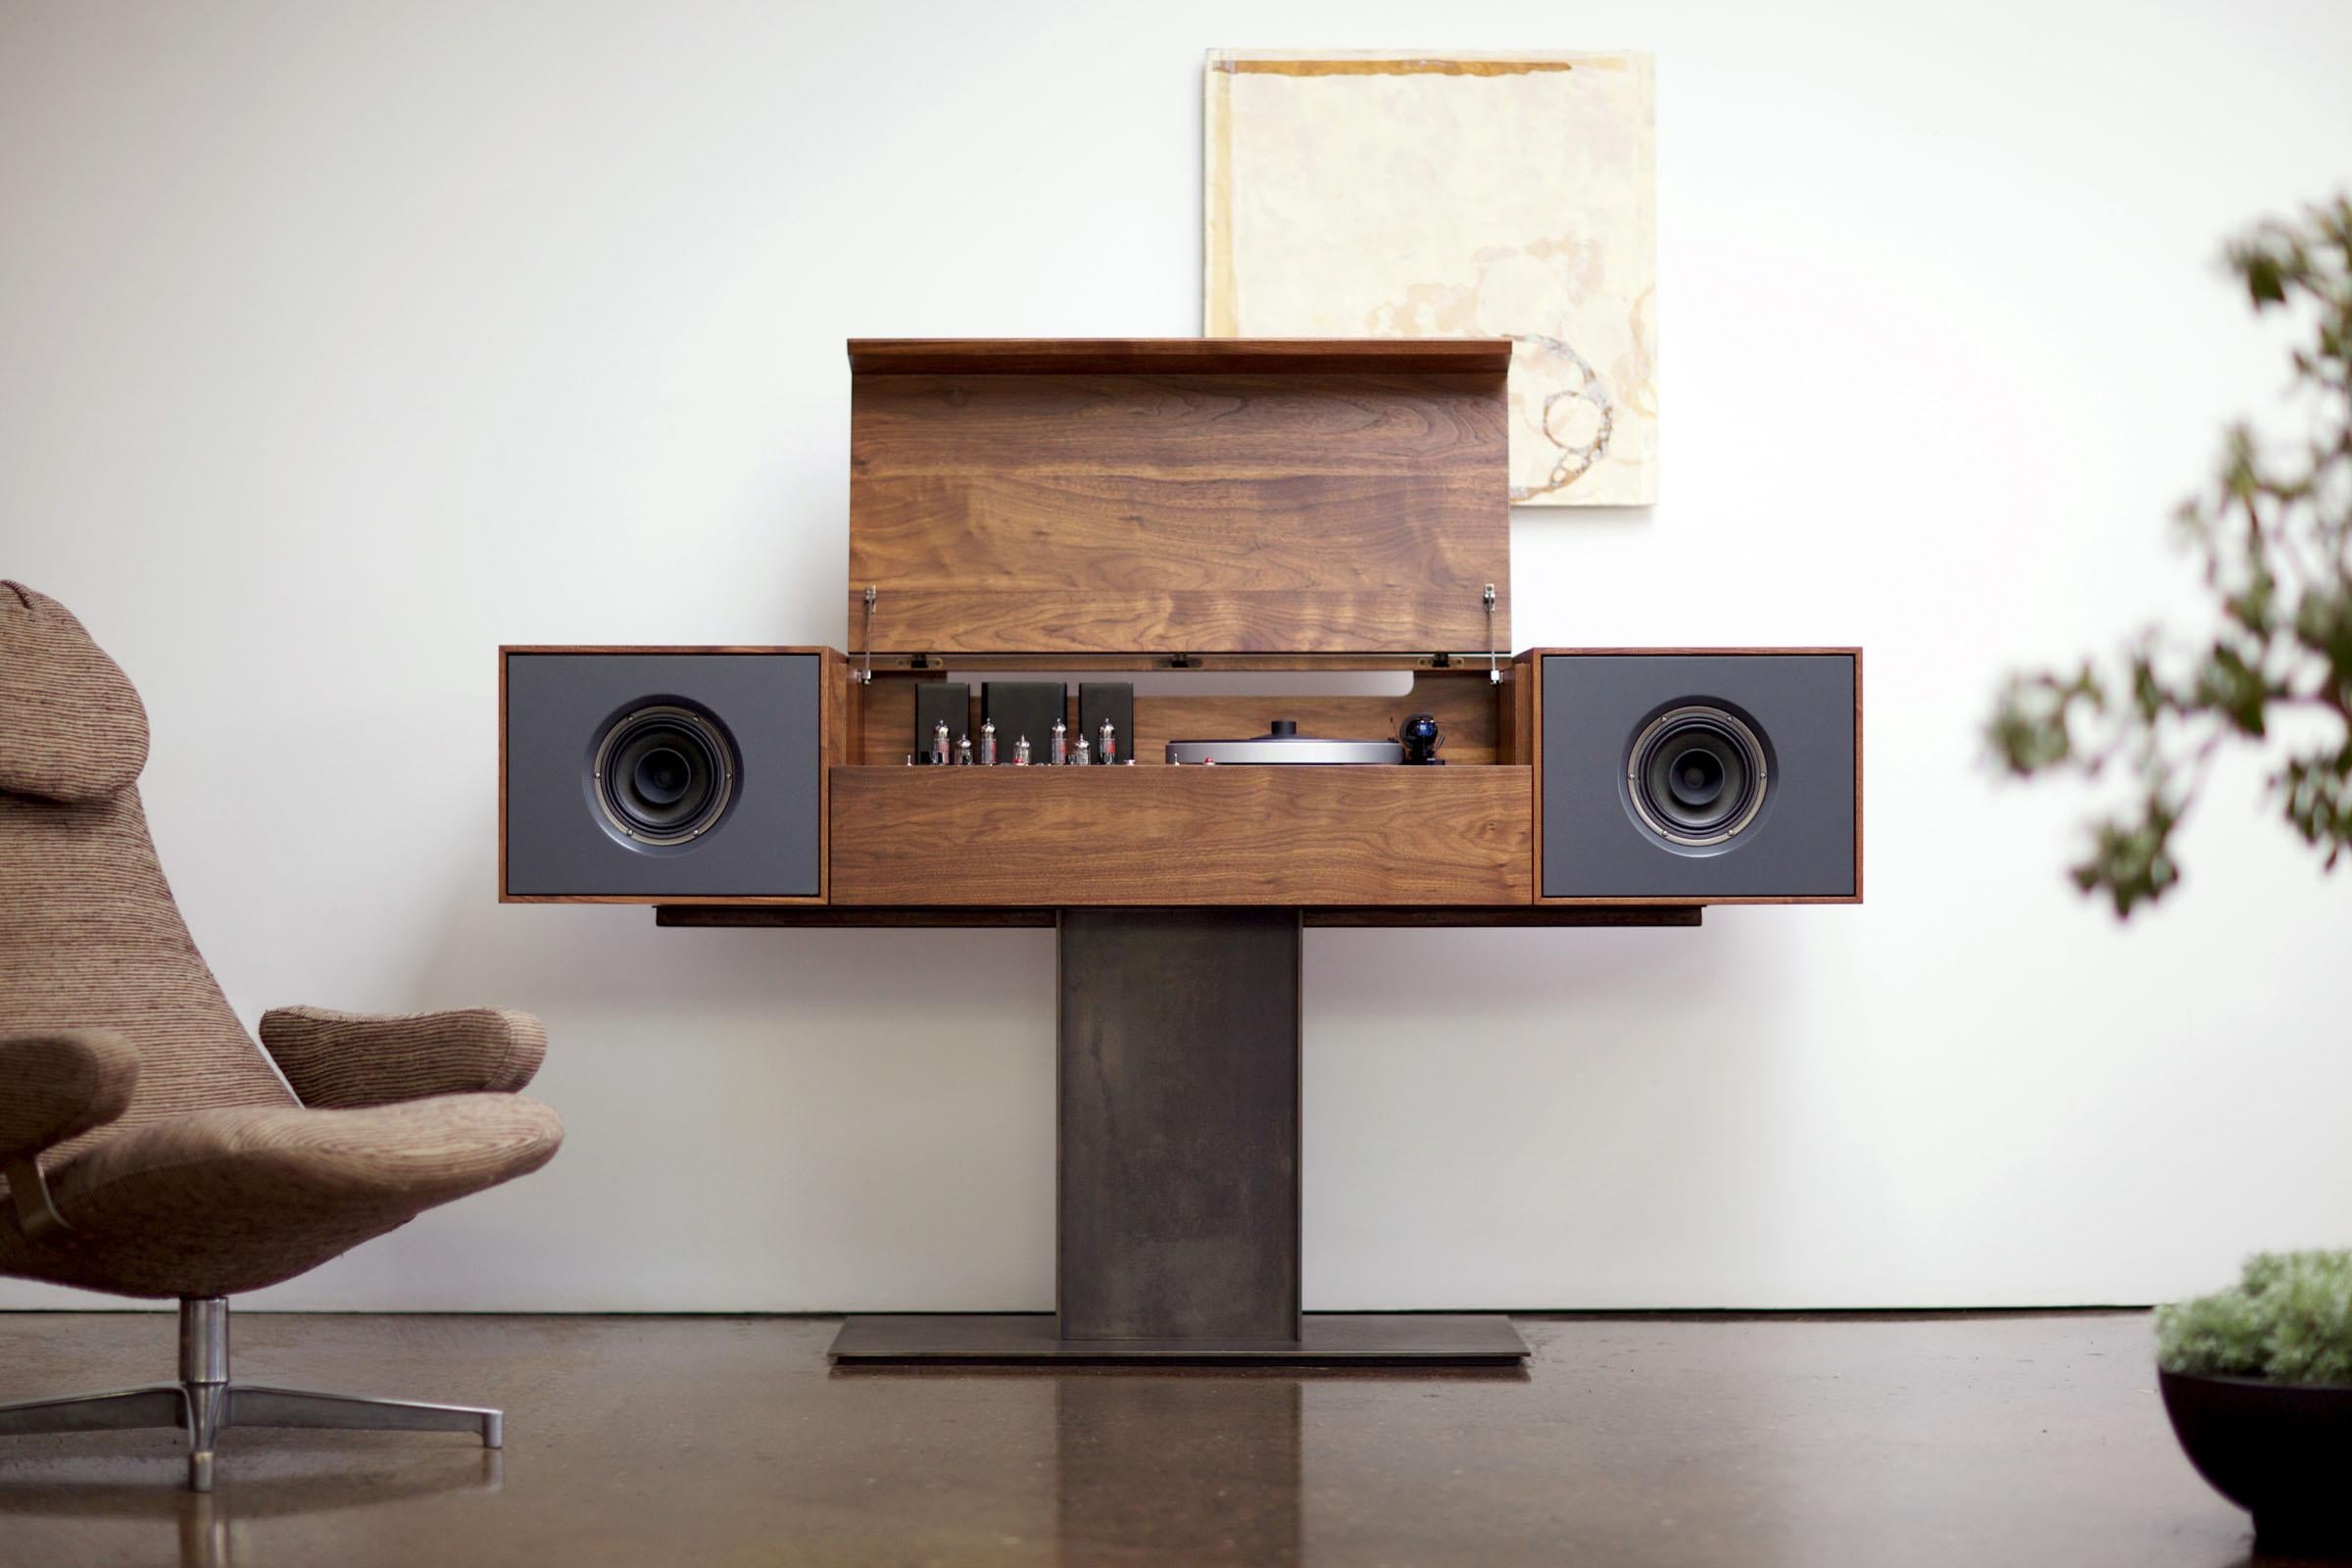 The flagship of the Symbol audio line, the Modern Record Console pays homage to “all in one” console hifi’s of the 1950s, an idea whose time, we believe, has come around again. Each cabinet is individually crafted in the tradition of Fine bench-made